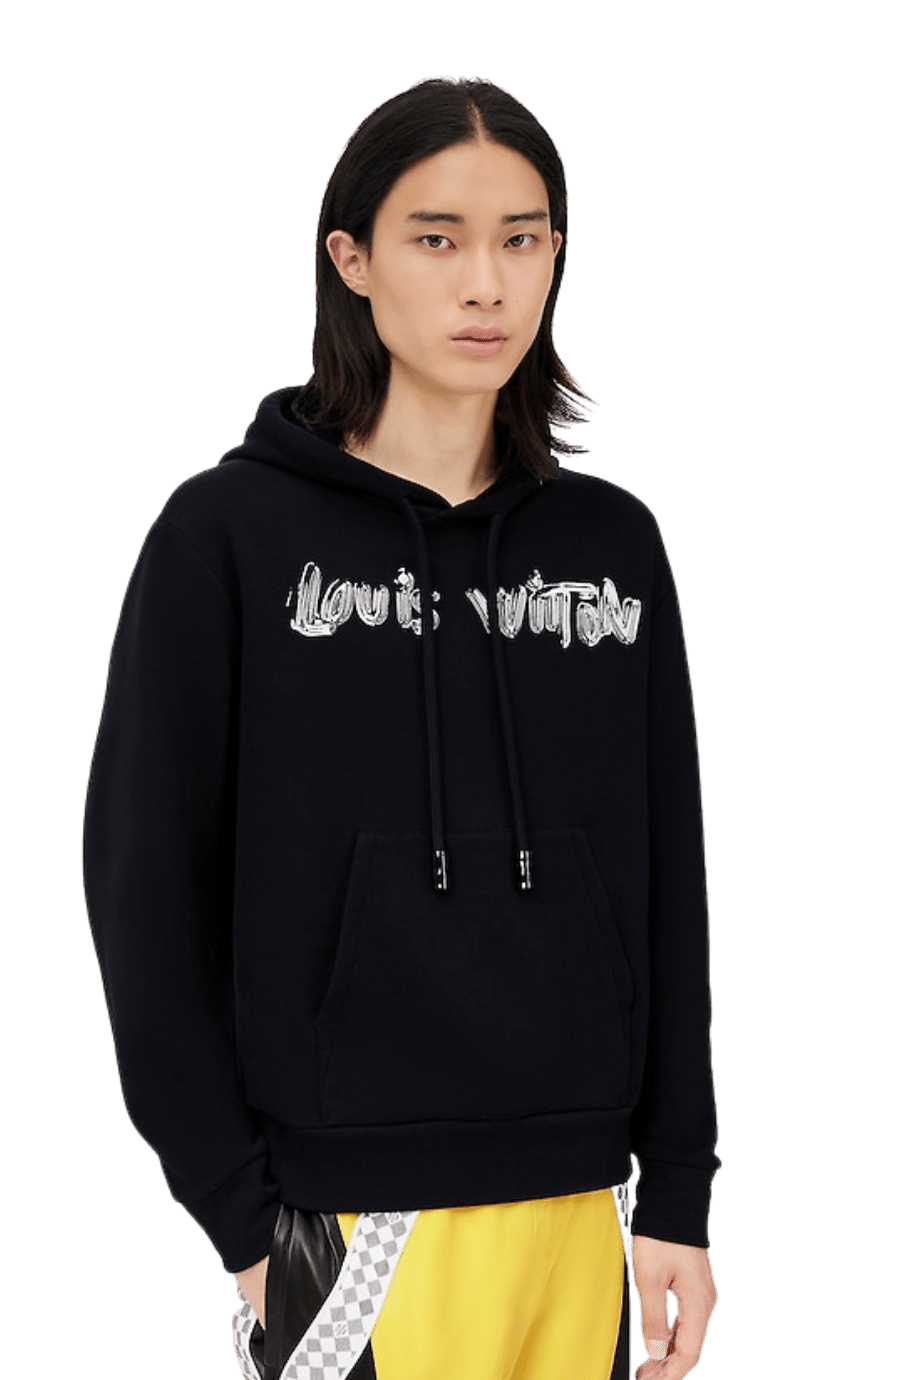 Louis Vuitton GRAPHIC HOODIE